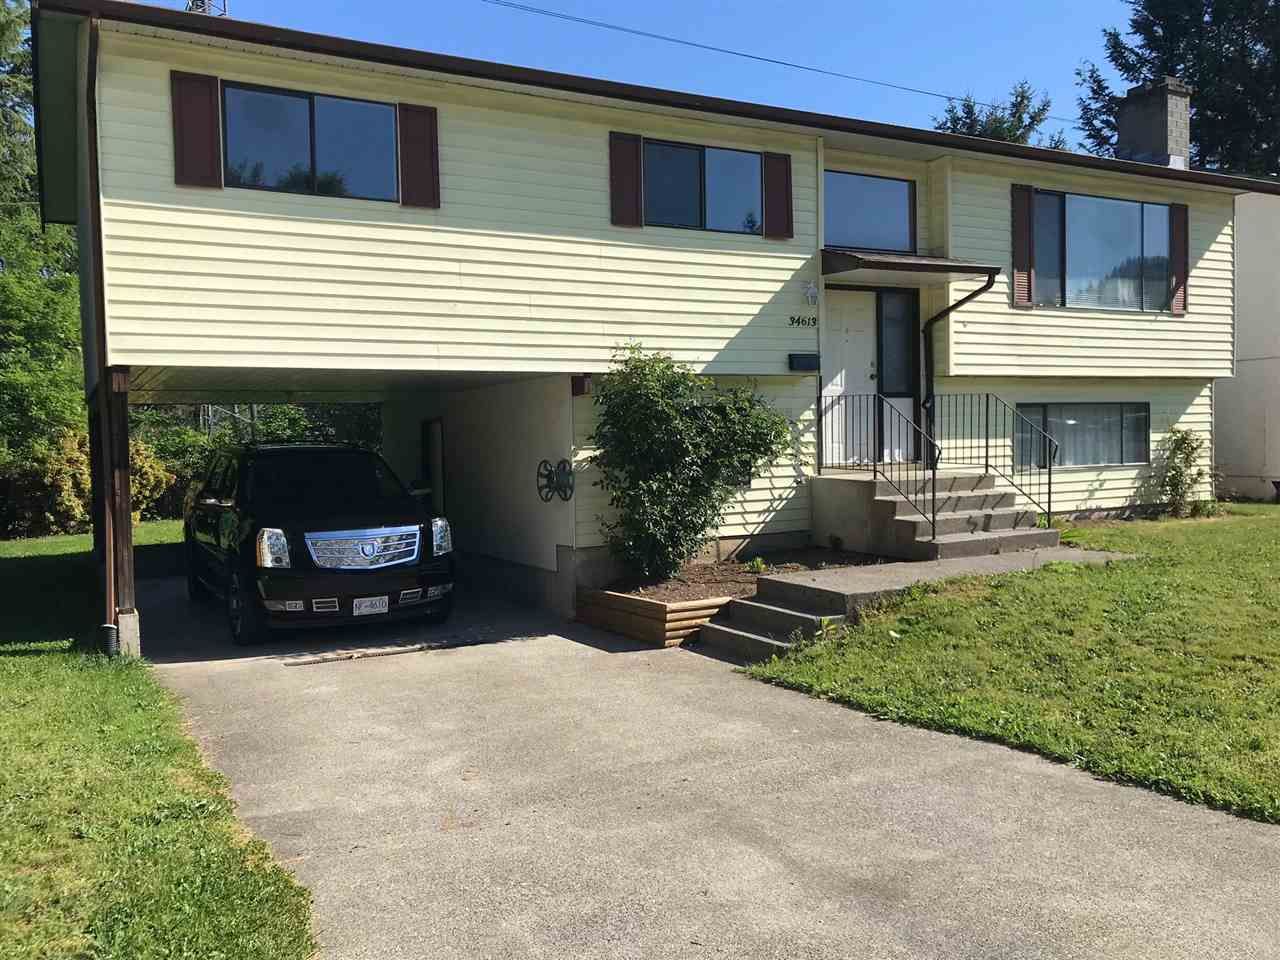 Main Photo: 34613 SOMERSET Avenue in Abbotsford: Abbotsford East House for sale : MLS®# R2368063